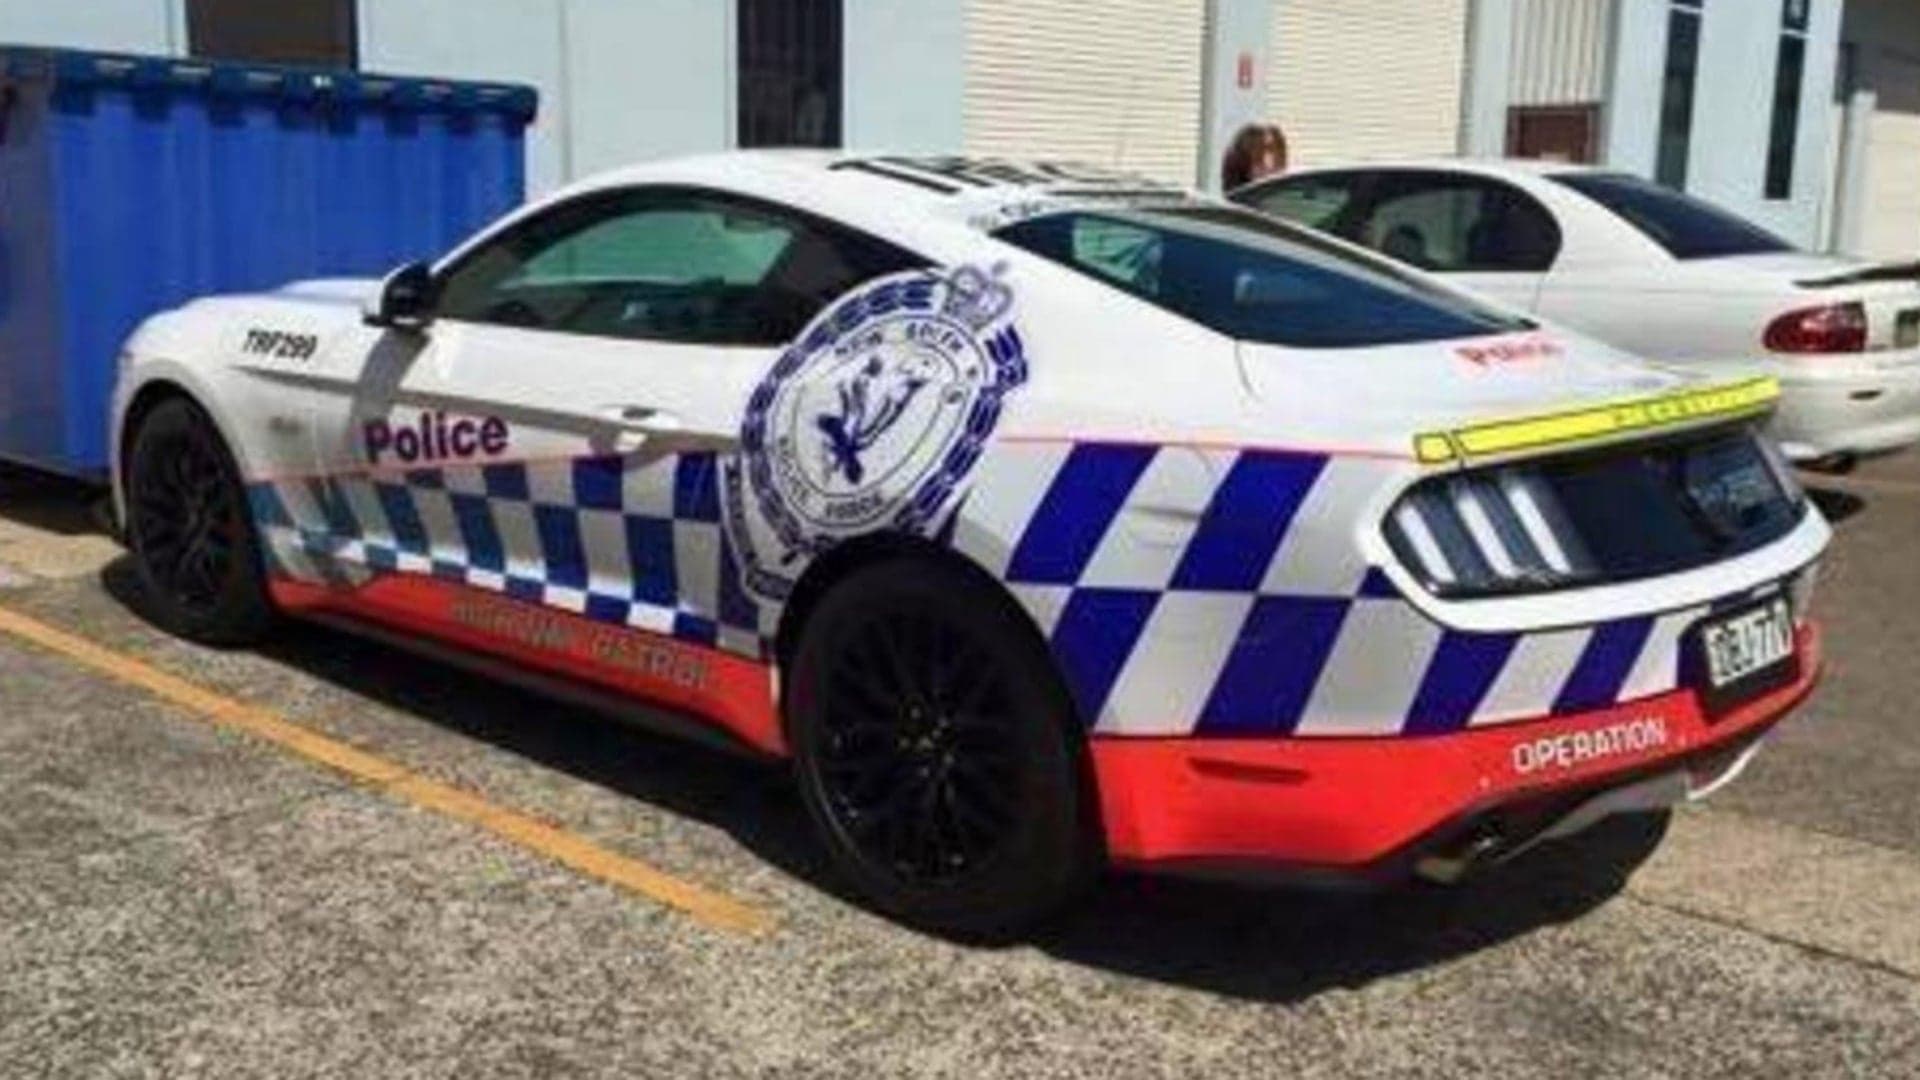 Return of the SSP: Australian Police Are Getting a Real 2020 Ford Mustang Interceptor